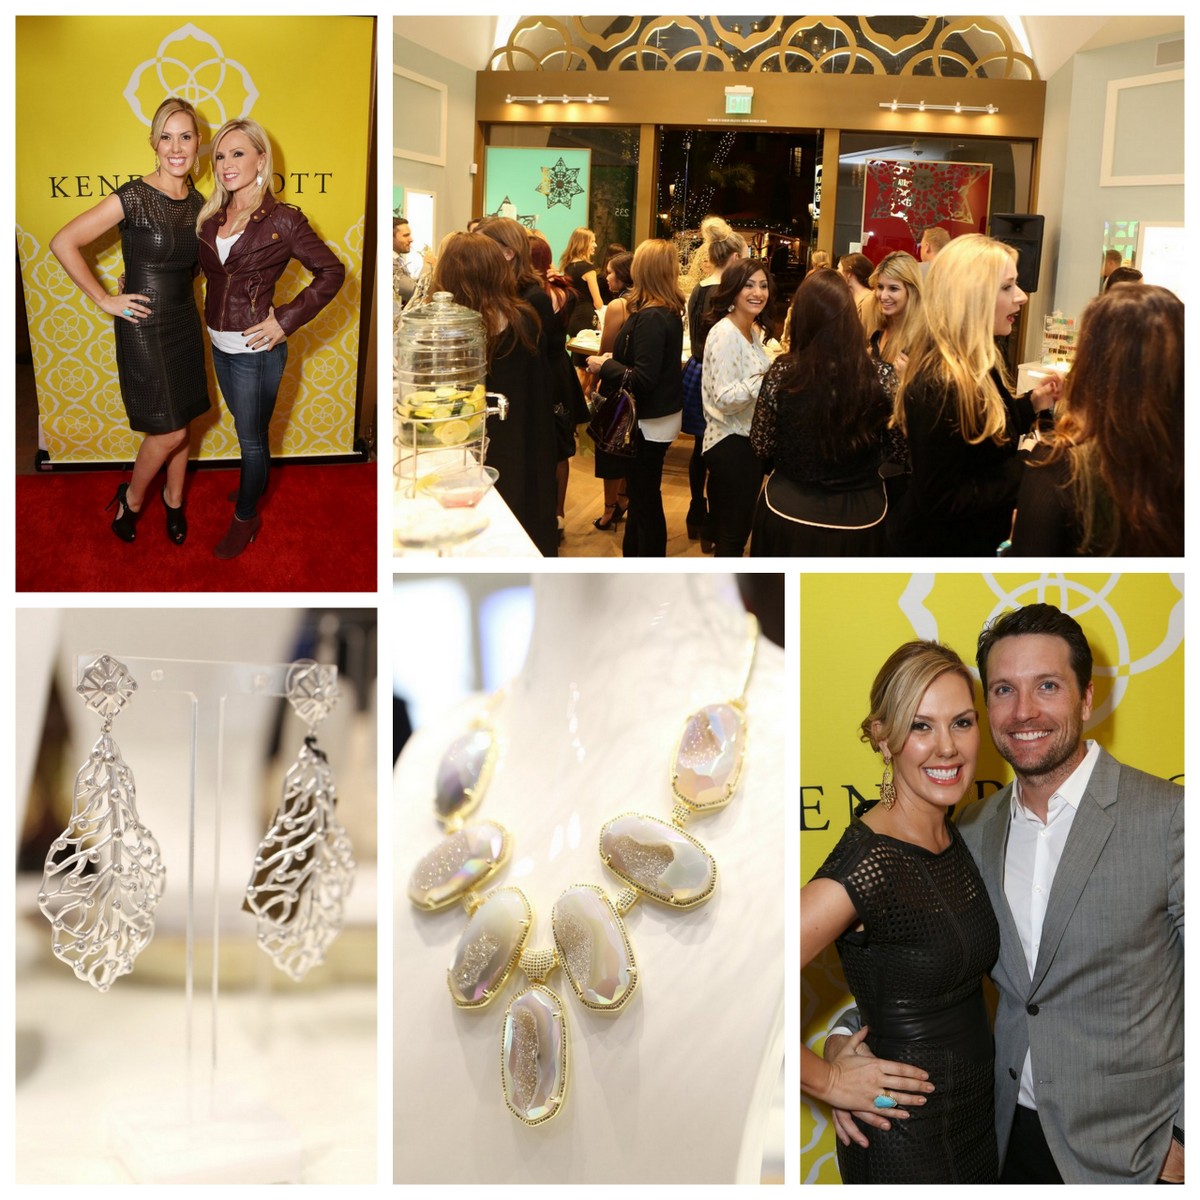 Kendra Scott’s private launch party for new LUXE collection